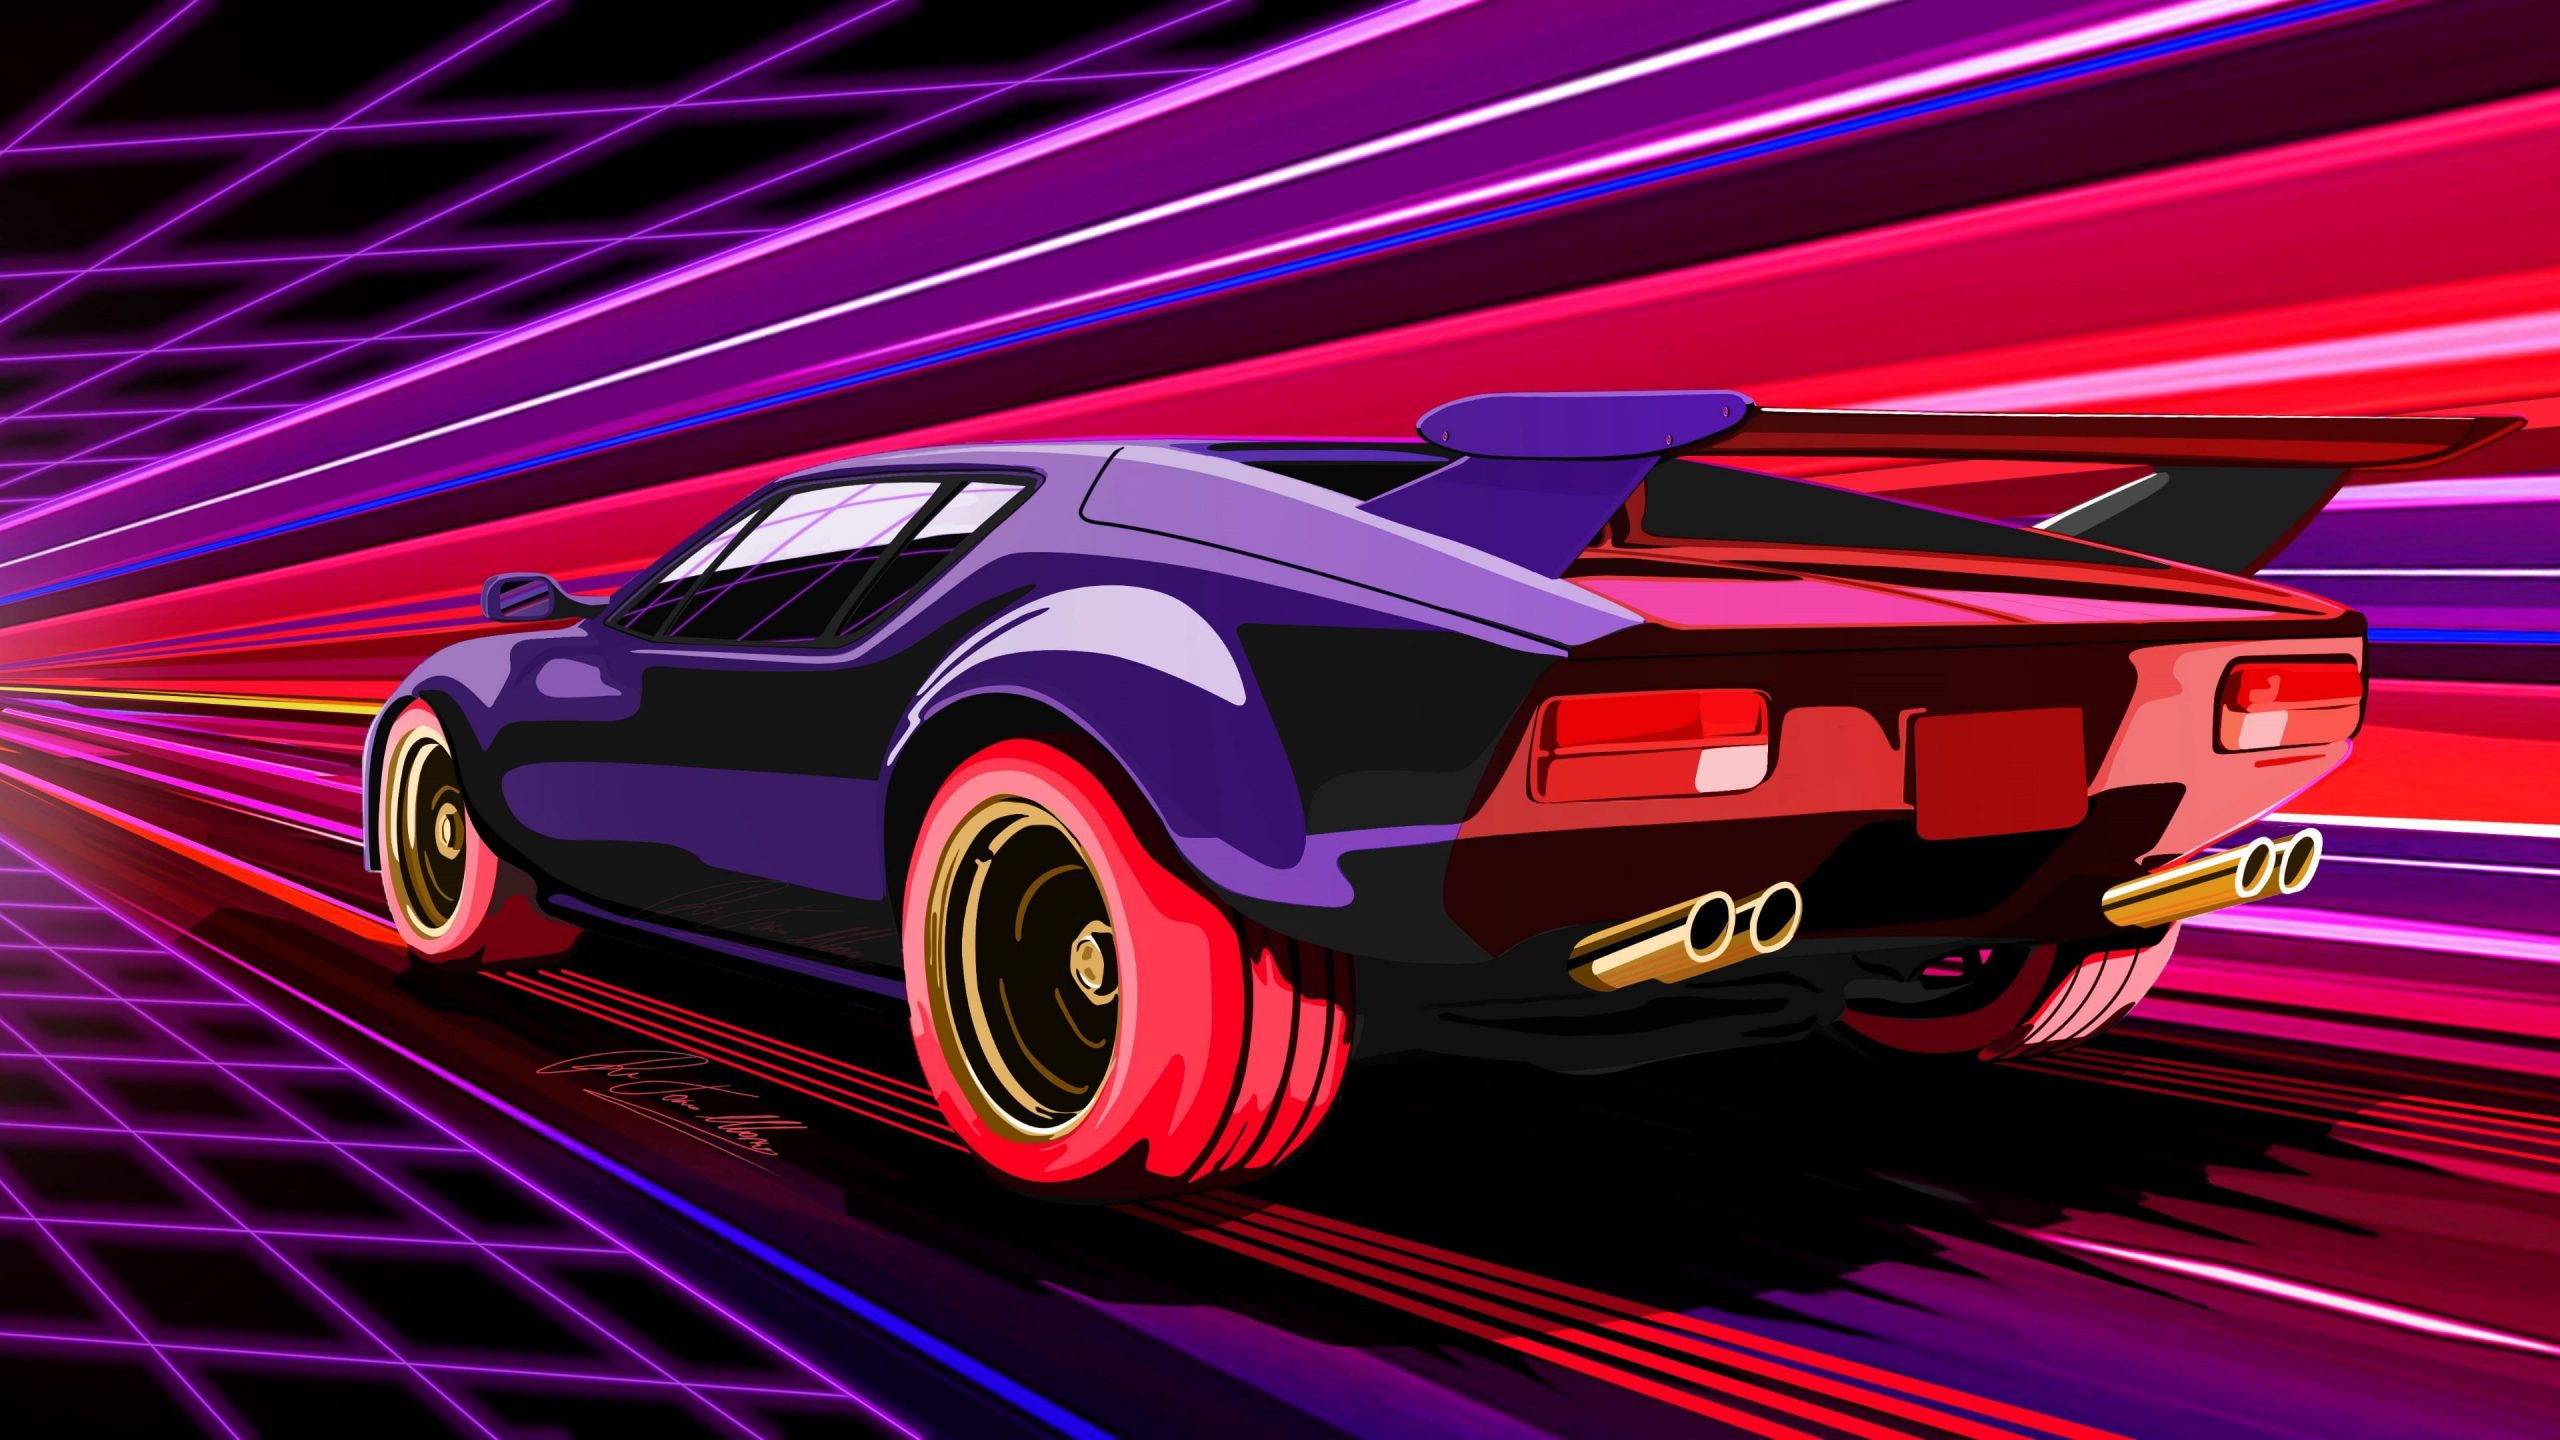 Wallpaper retrowave, car, vehicle, sports car, synthwave, 80s, 1980s